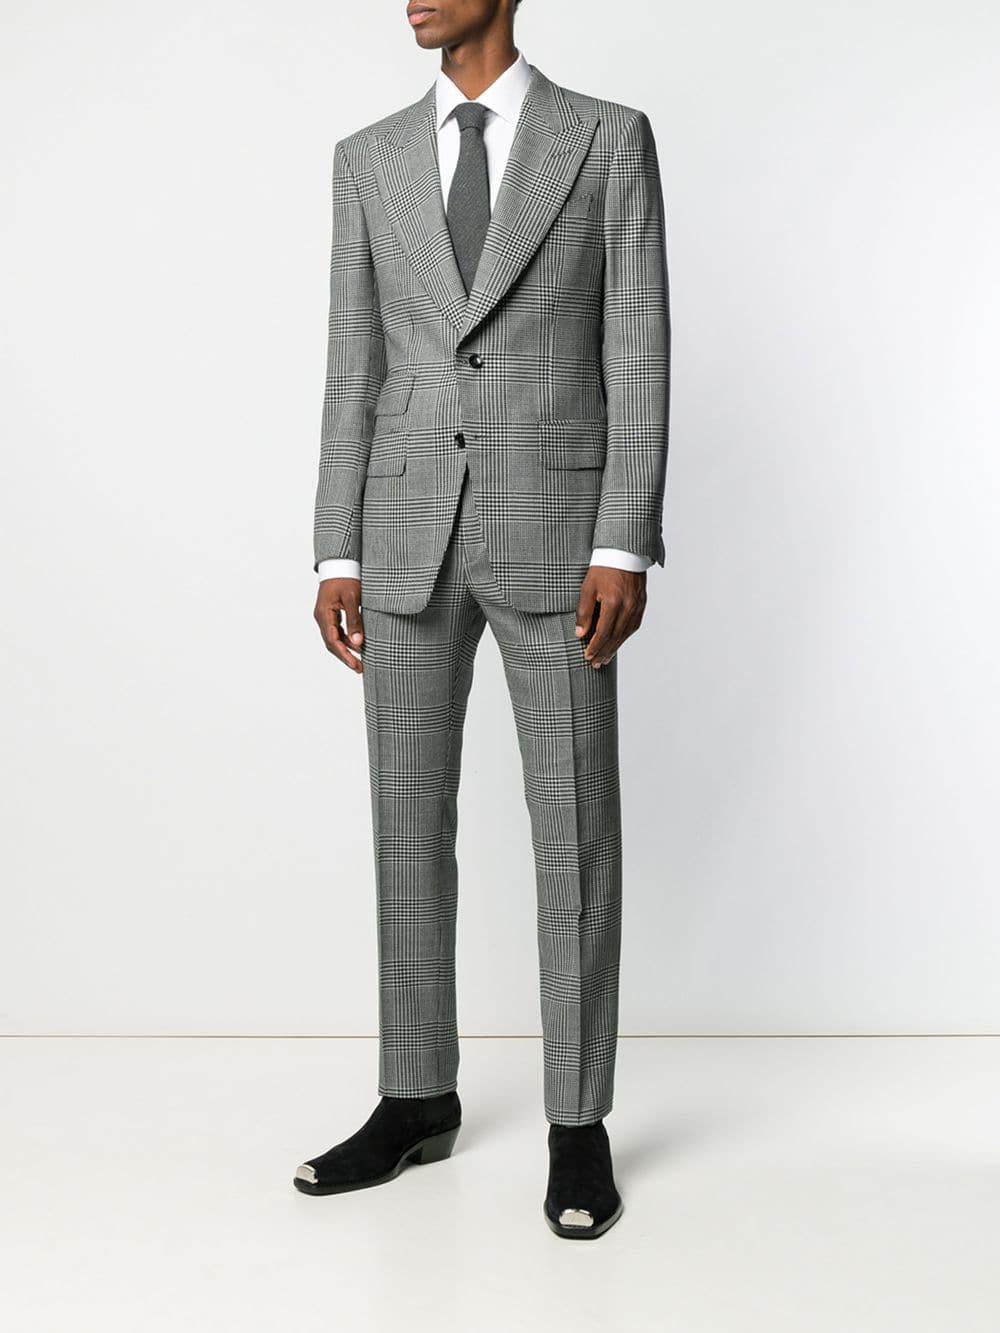 Tom Ford Wool Prince Of Wales Check Suit in Grey (Gray) for Men - Lyst